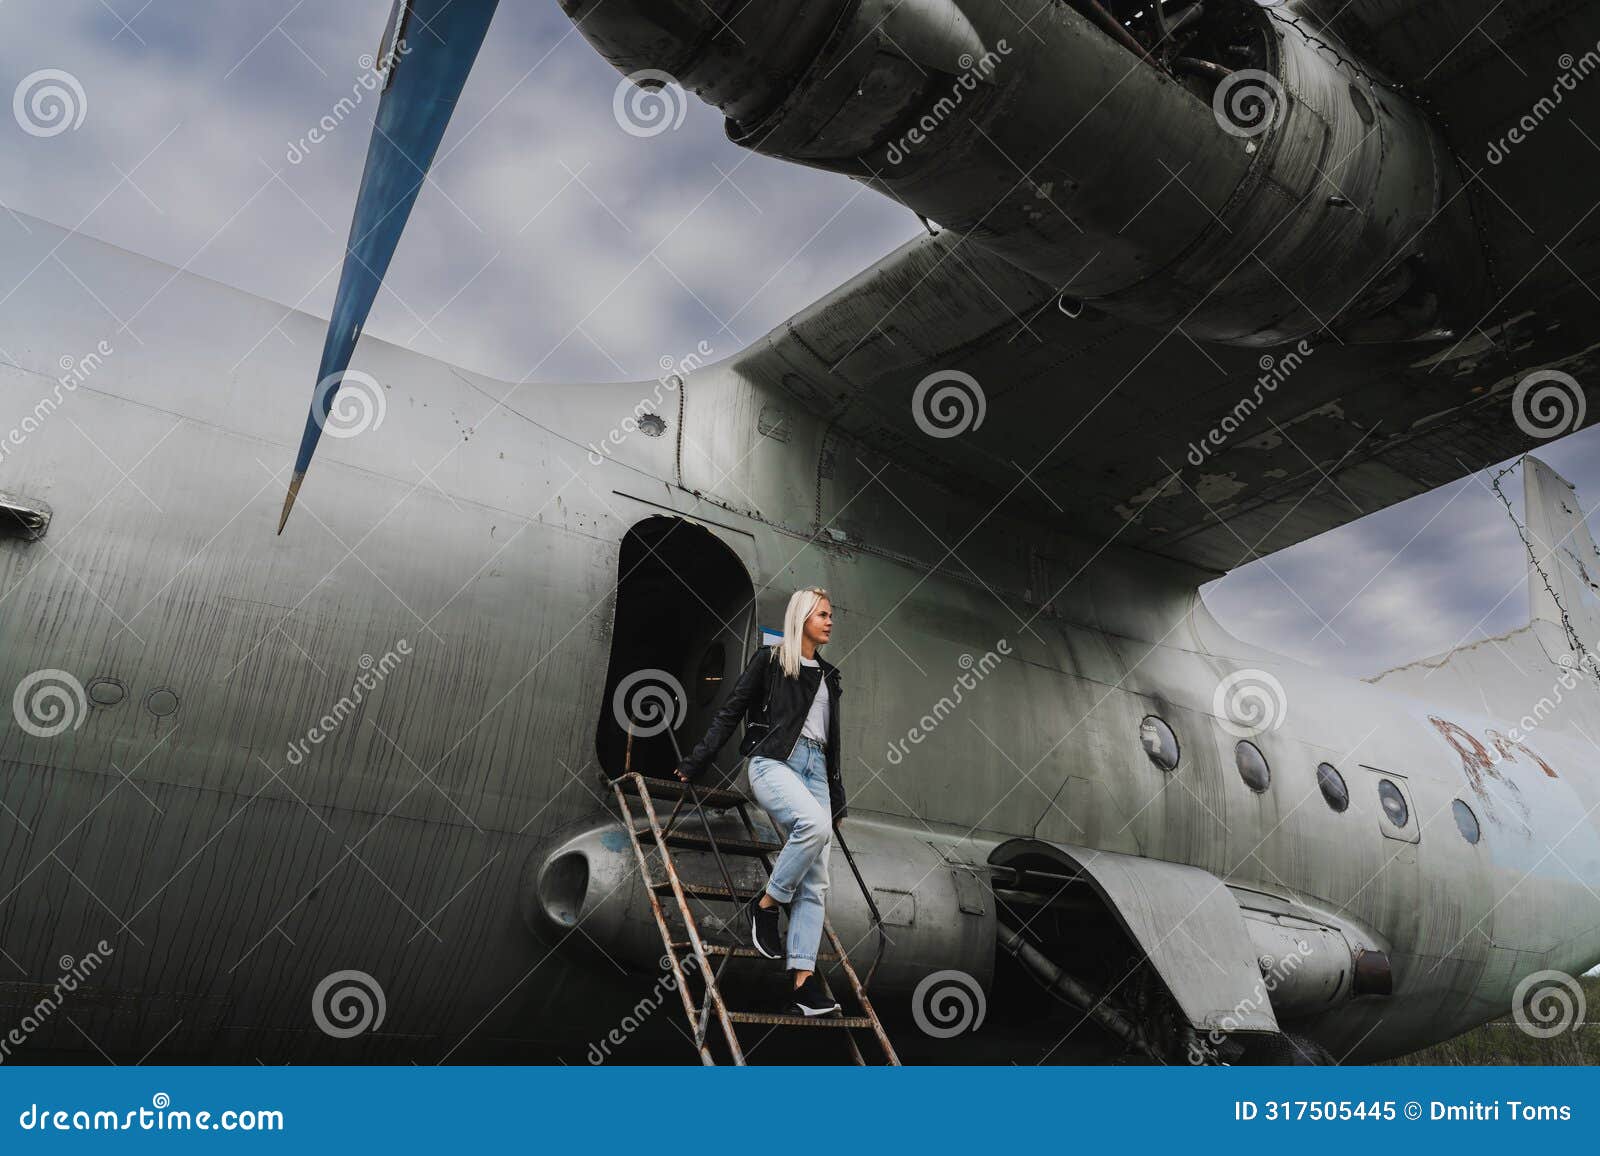 a blonde girl descends the ramp from an old decommissioned soviet military cargo plane an-12